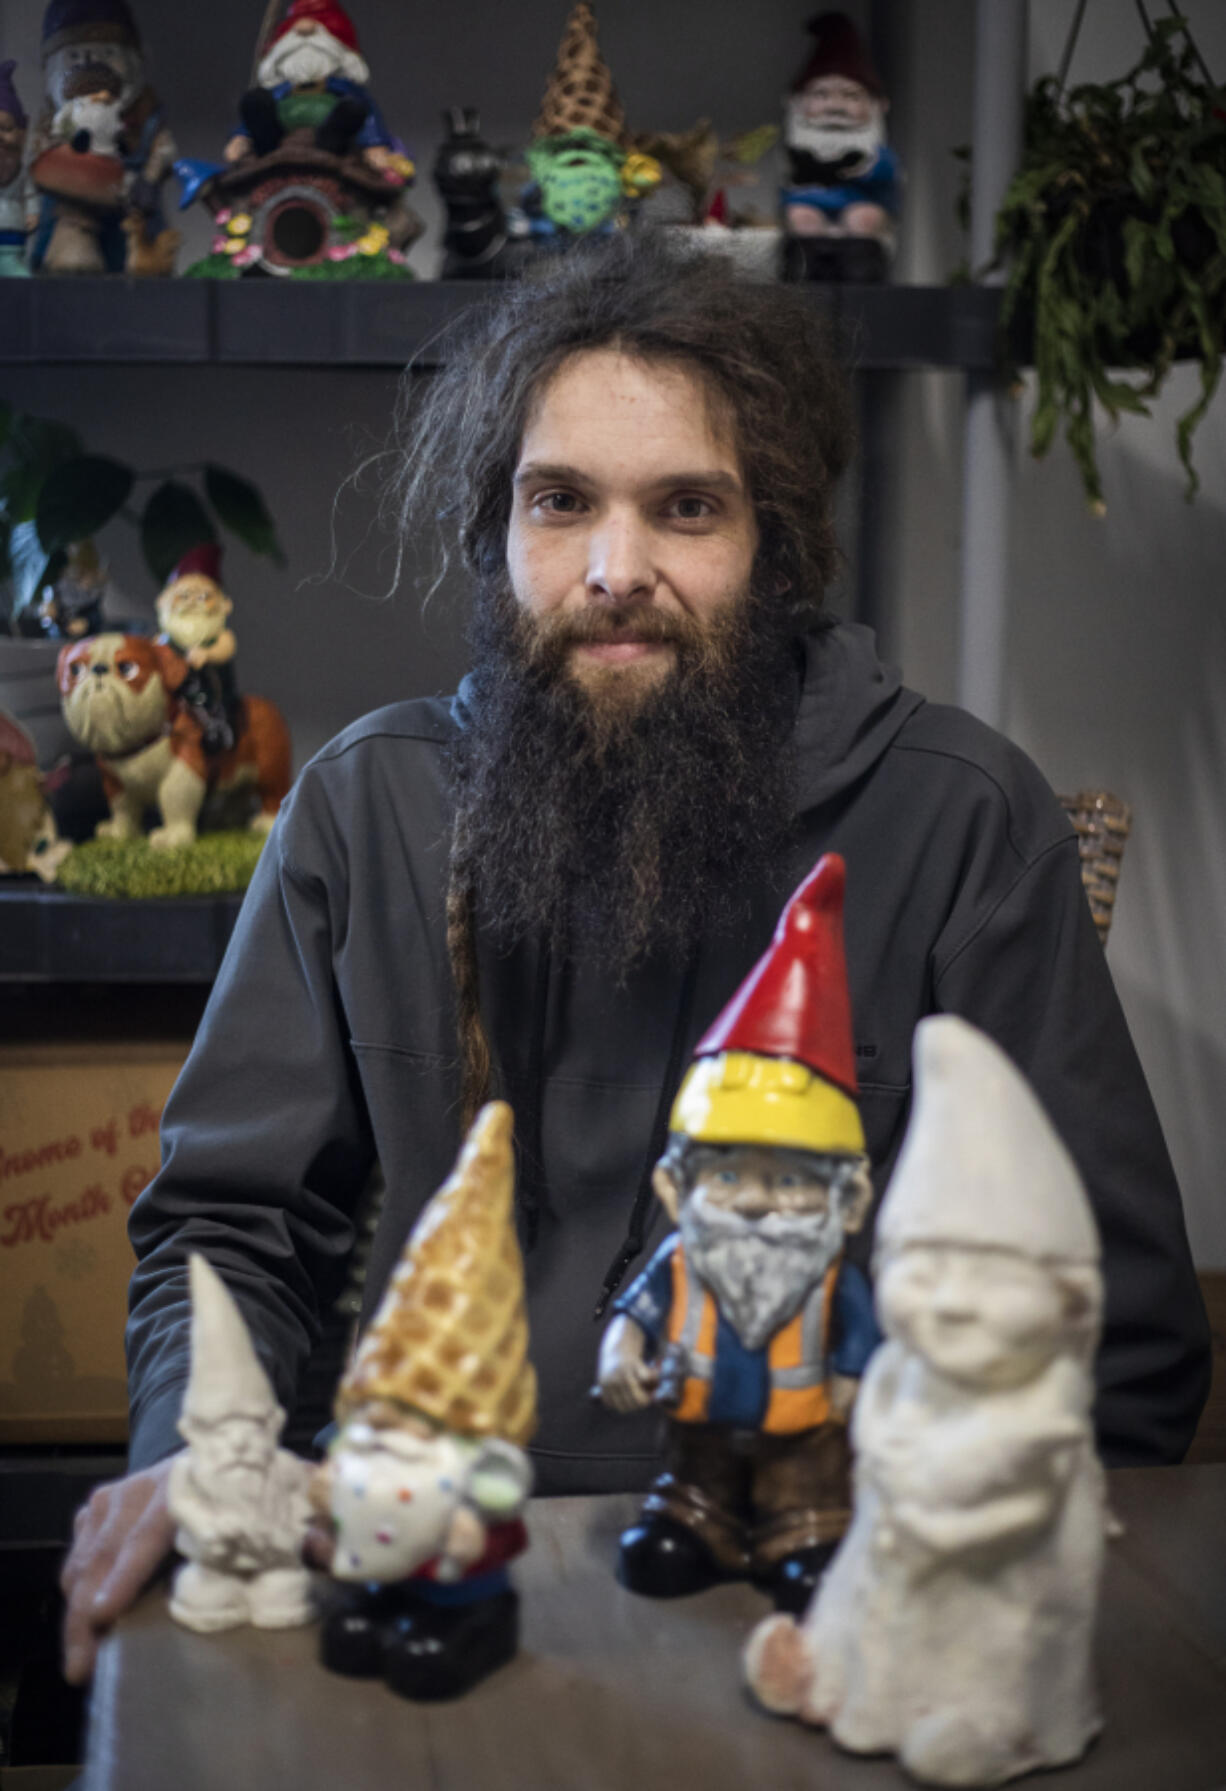 Ryan Tiland, creator of Gnome of the Month Club, on Dec. 22 in Sultan.